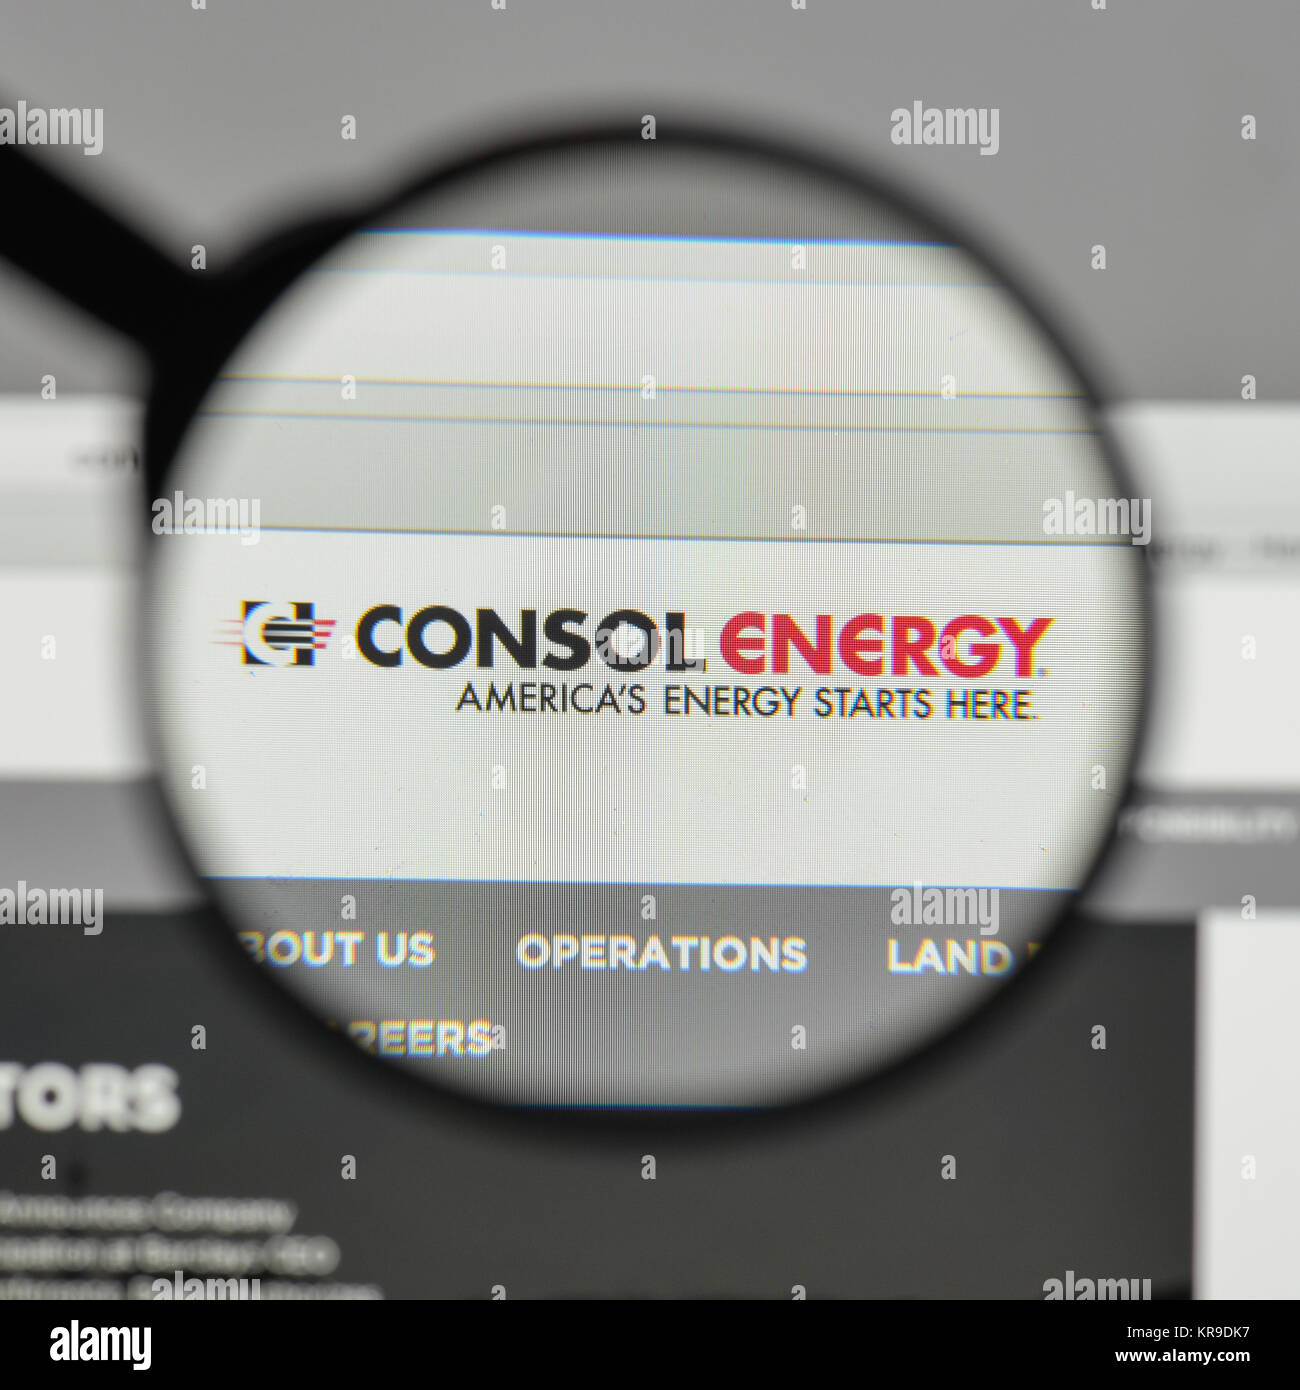 Milan, Italy - August 10, 2017: Consol Energy logo on the website homepage. Stock Photo